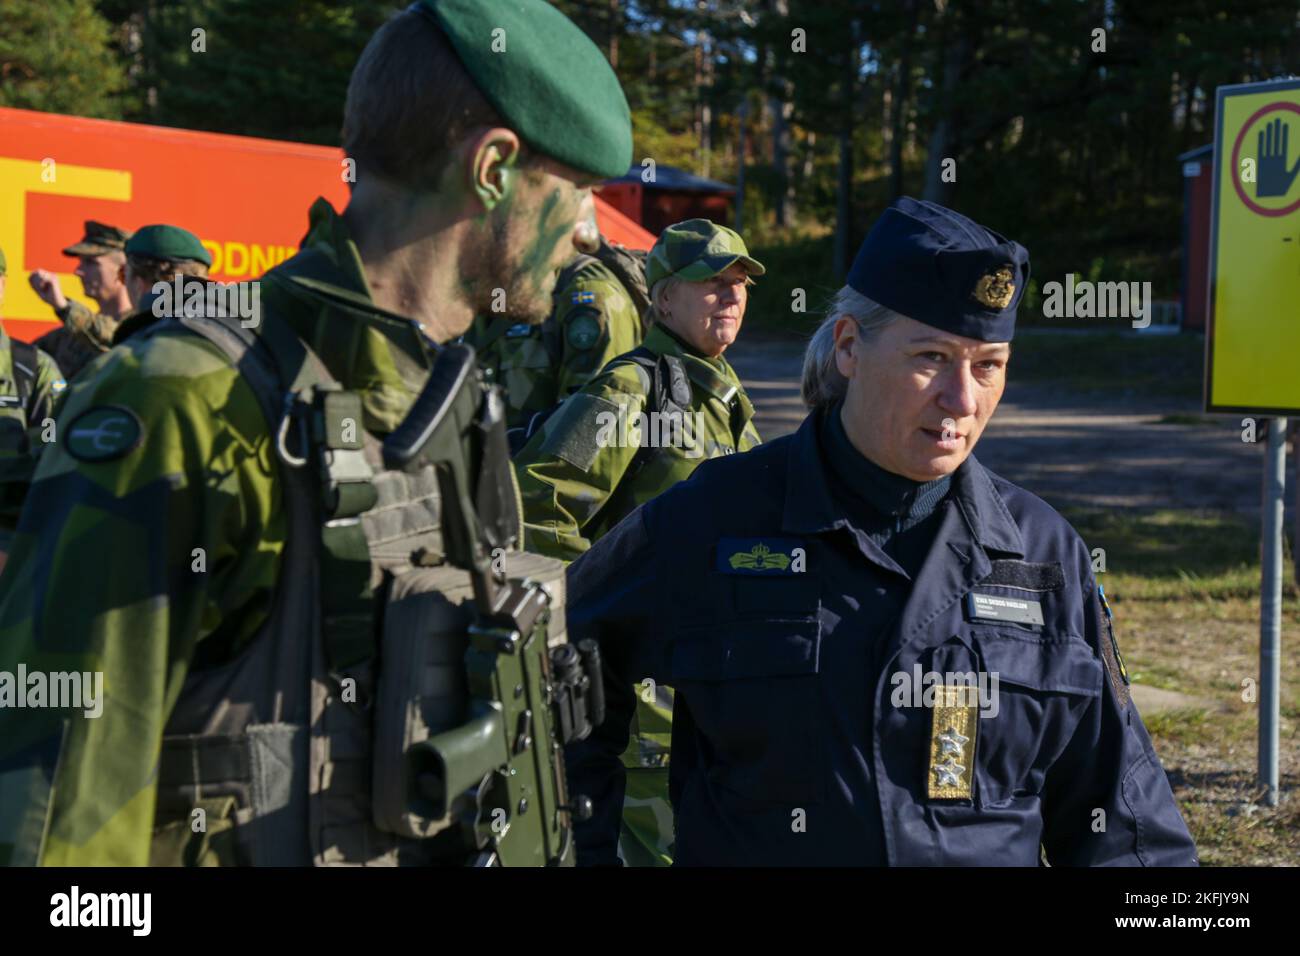 Swedish Marine Capt. Jacob Lindholm (left), Swedish ground force commander, escorts Swedish Navy Rear Admiral Ewa Skoog Haslum (right), Chief of Swedish Navy, while visiting U.S. and Swedish Marines during exercise Archipelago Endeavor 22 (AE22) on Berga Naval Base, Sweden, Sept. 21, 2022. AE22 is an integrated field training exercise that increases operational capability and enhances strategic cooperation between the U.S. Marines and Swedish forces. Stock Photo